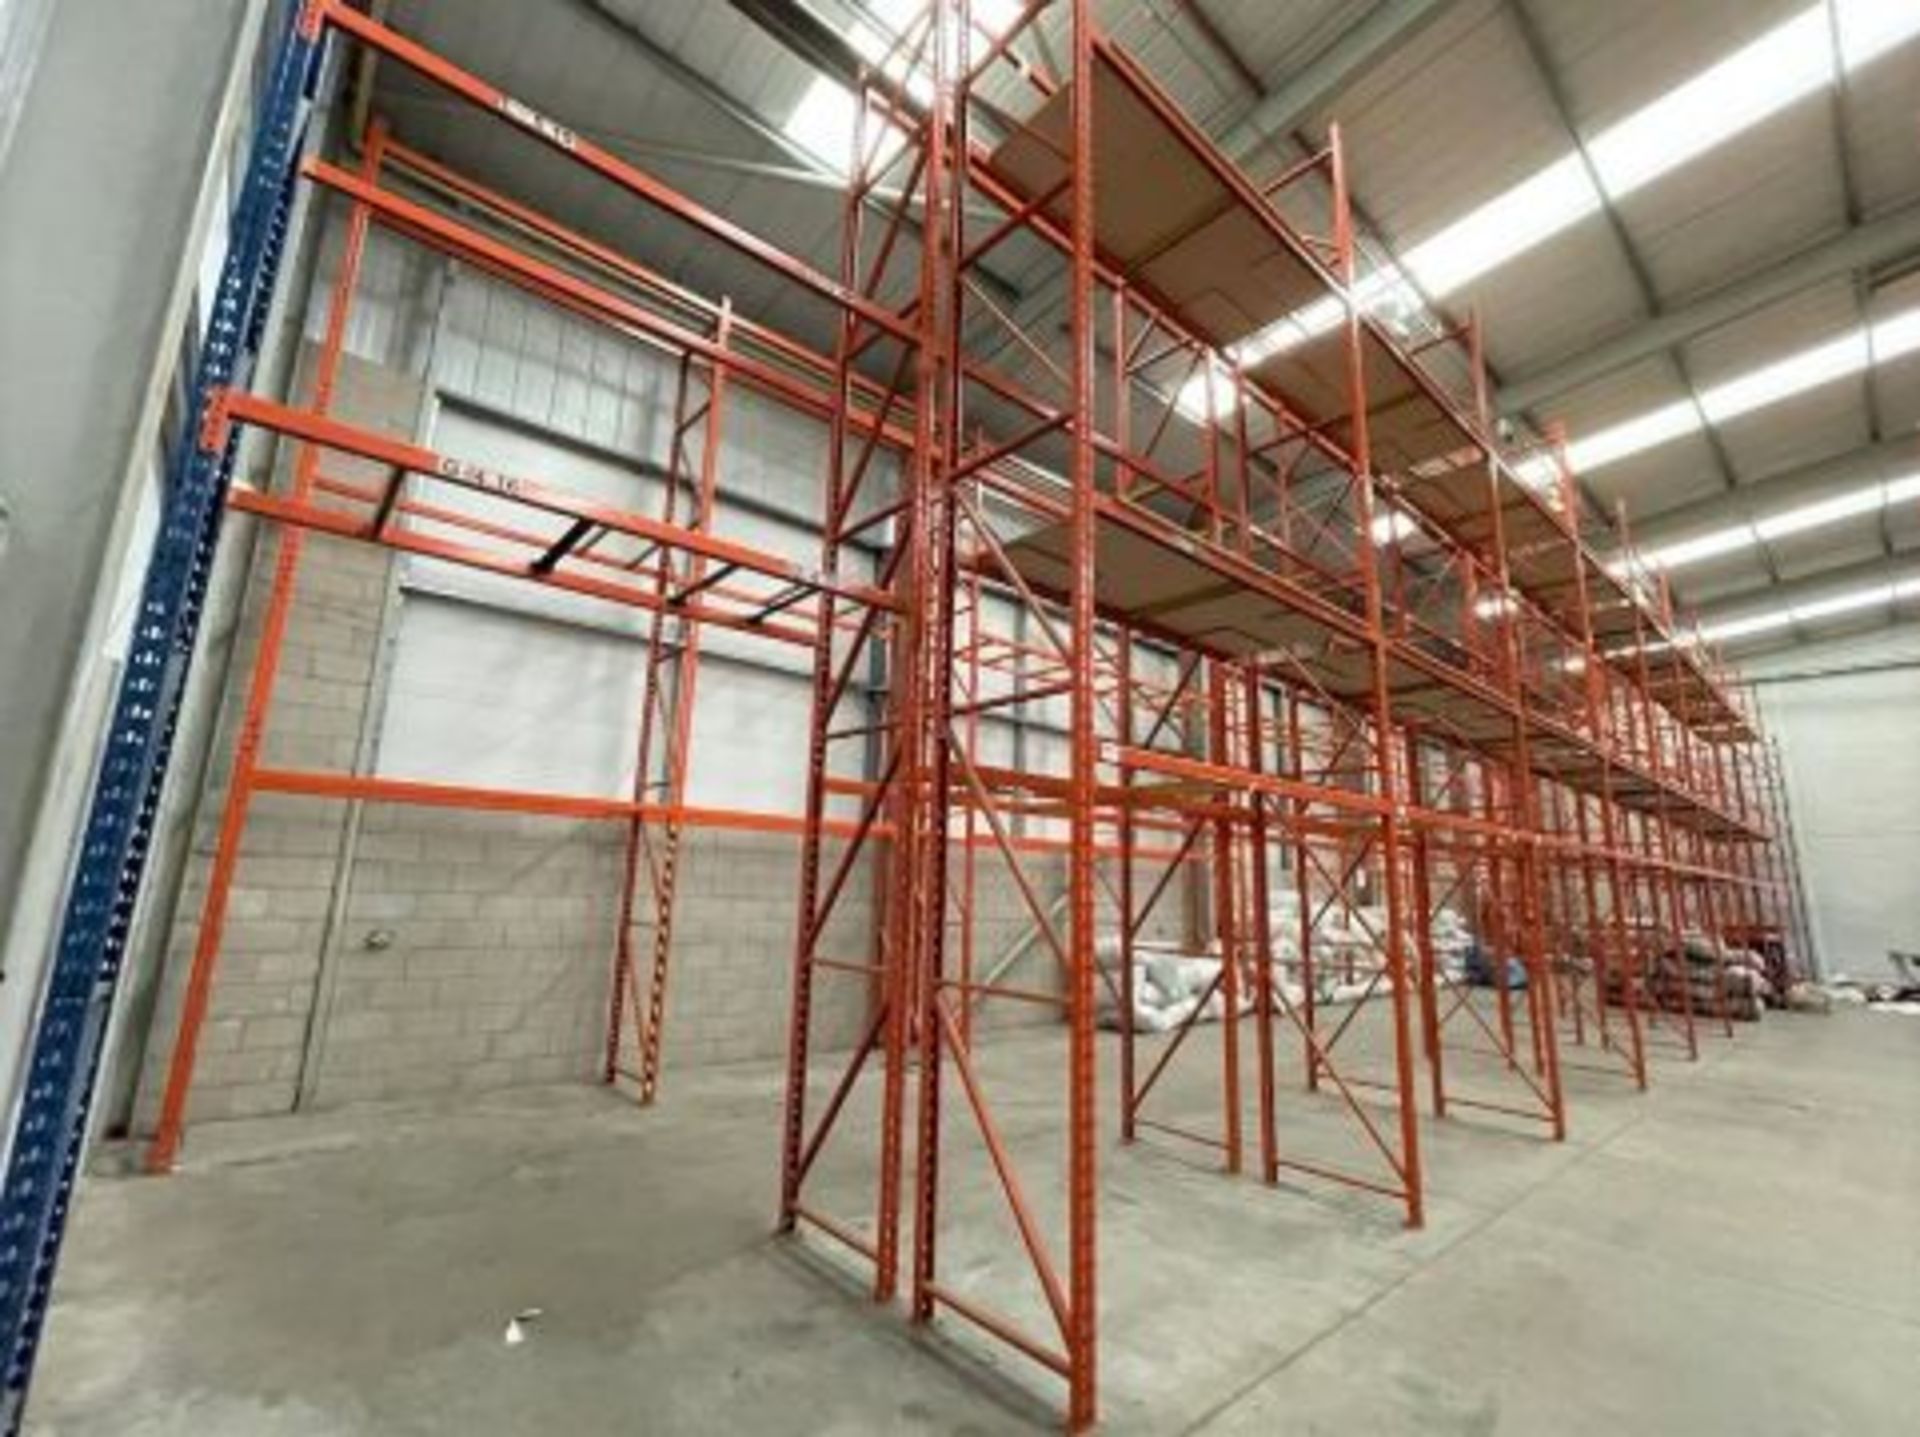 3 x Bays of RediRack Warehouse PALLET RACKING - Lot Includes 4 x Uprights and 18 x Crossbeams - - Image 2 of 9